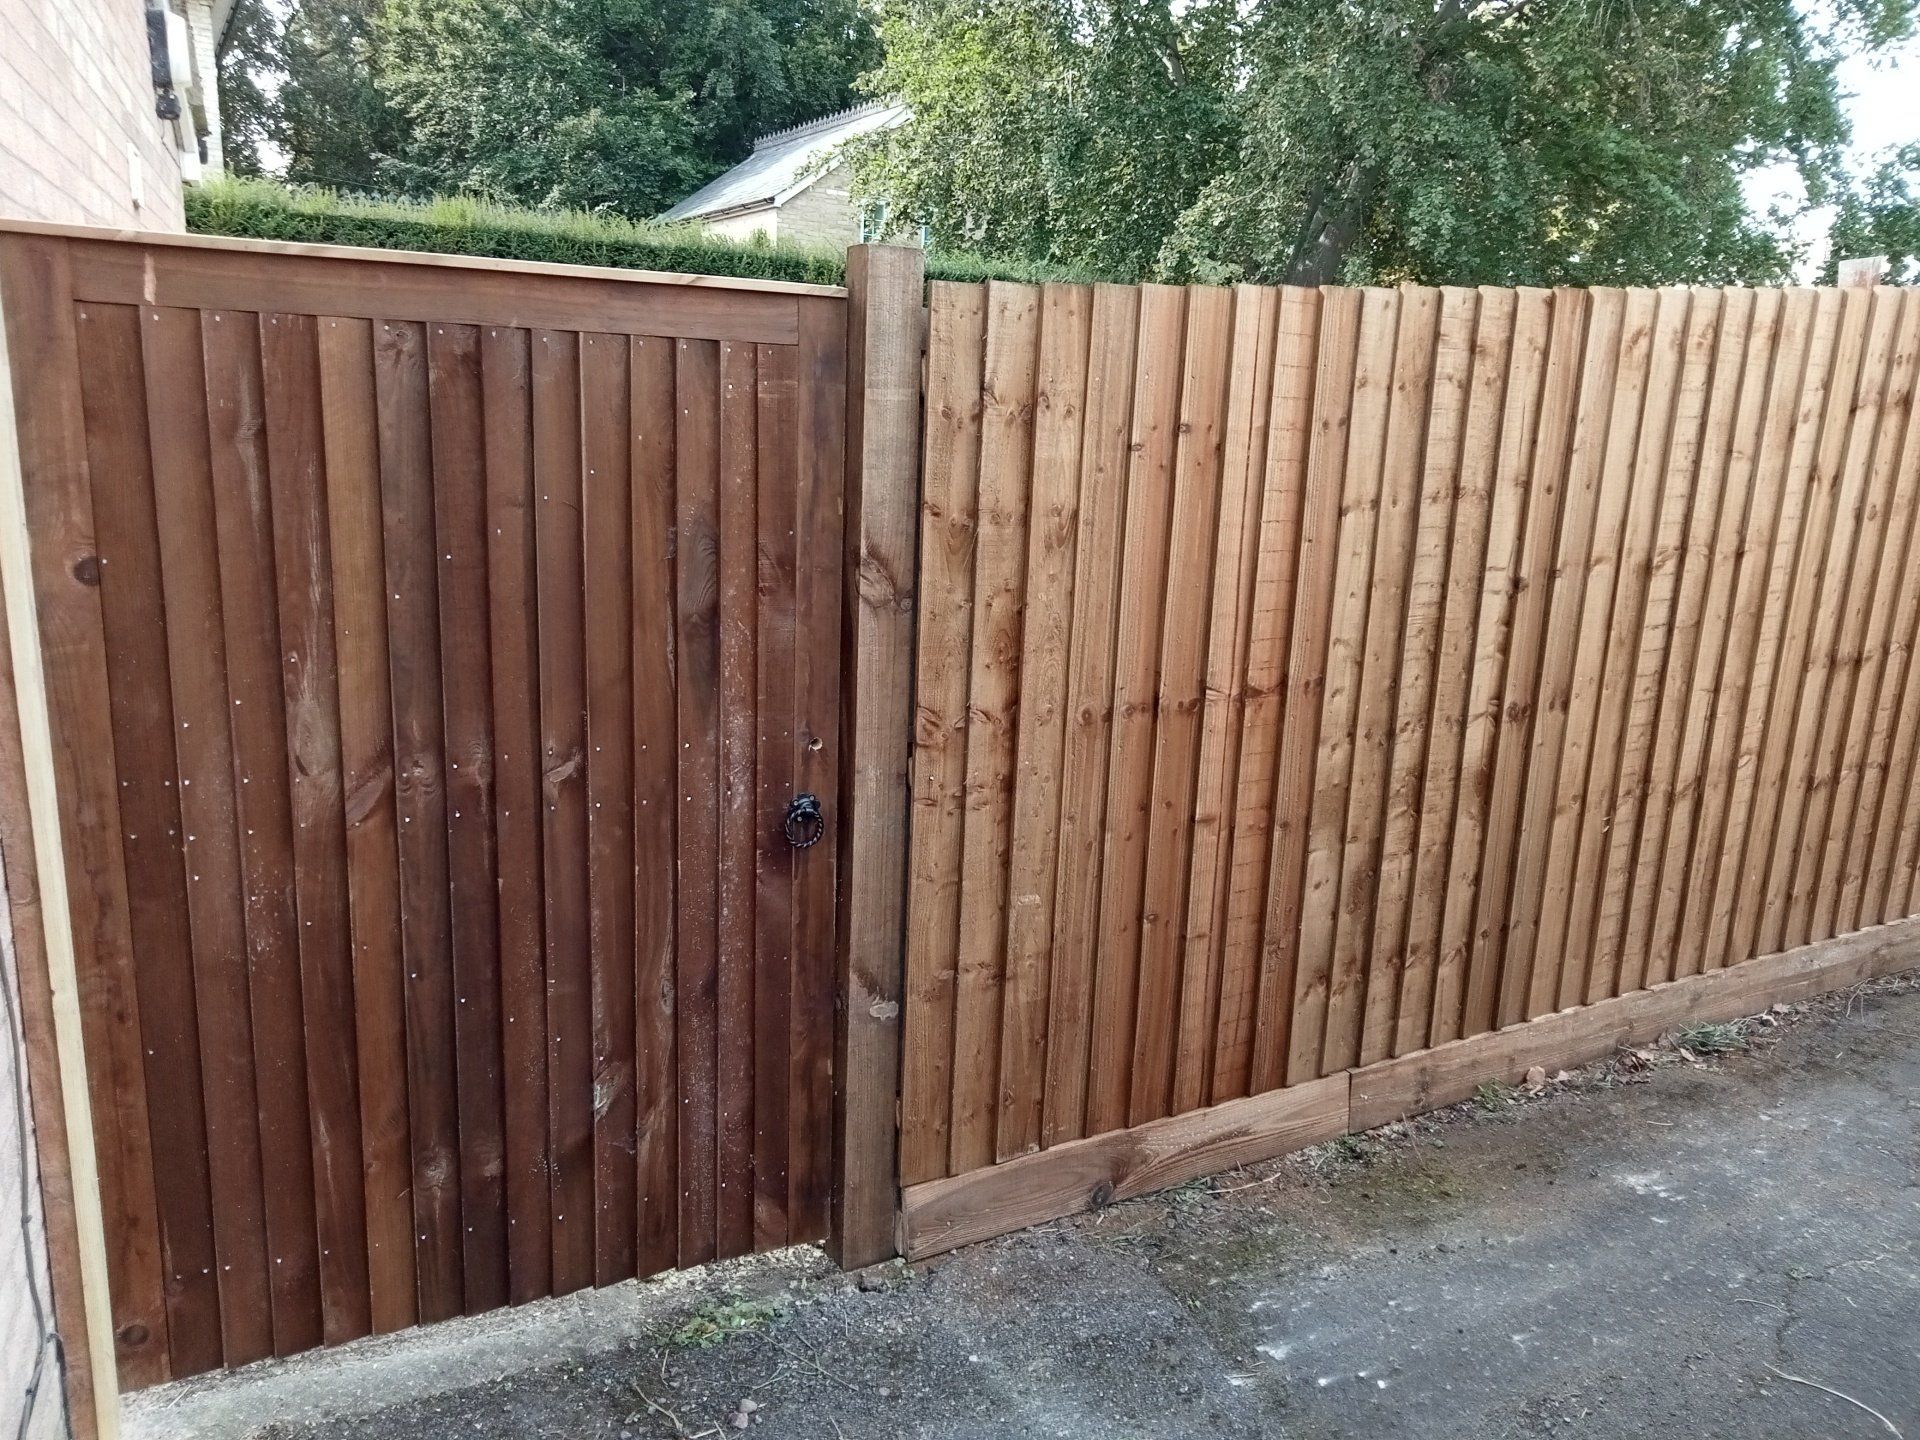 A wider than usual bespoke  6 ft single gate set into a feather edge fence, set at the same height as the fence to blend in.